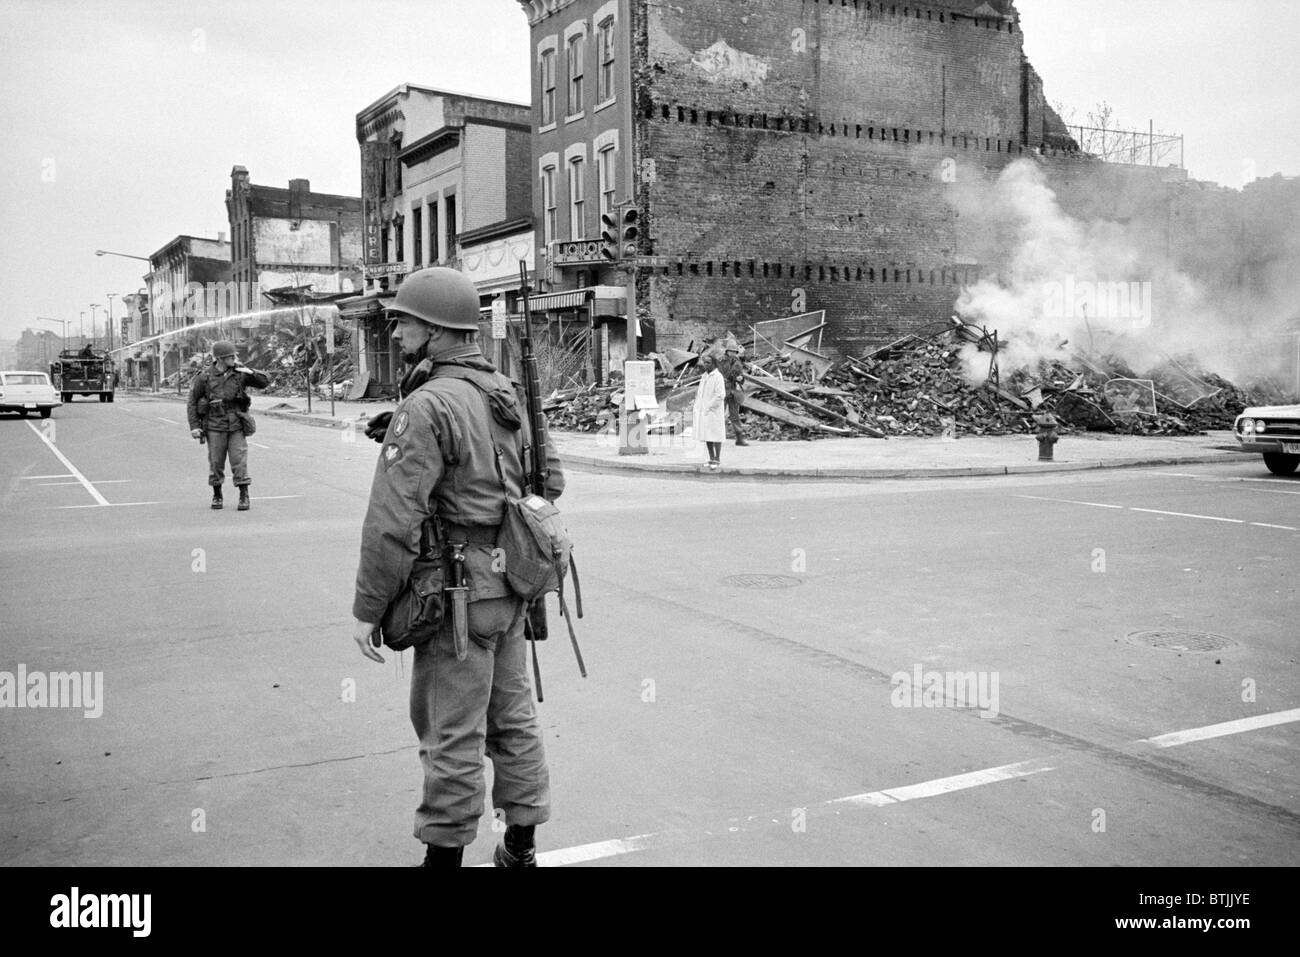 D.C. Riot, April '68. aftermath, soldier standing guard in a Washington D.C. street with the ruins of buildings that were destroyed during the riots that followed the assassination of Martin Luther King Jr., by Warren K. Leffler, April 8, 1968. Stock Photo